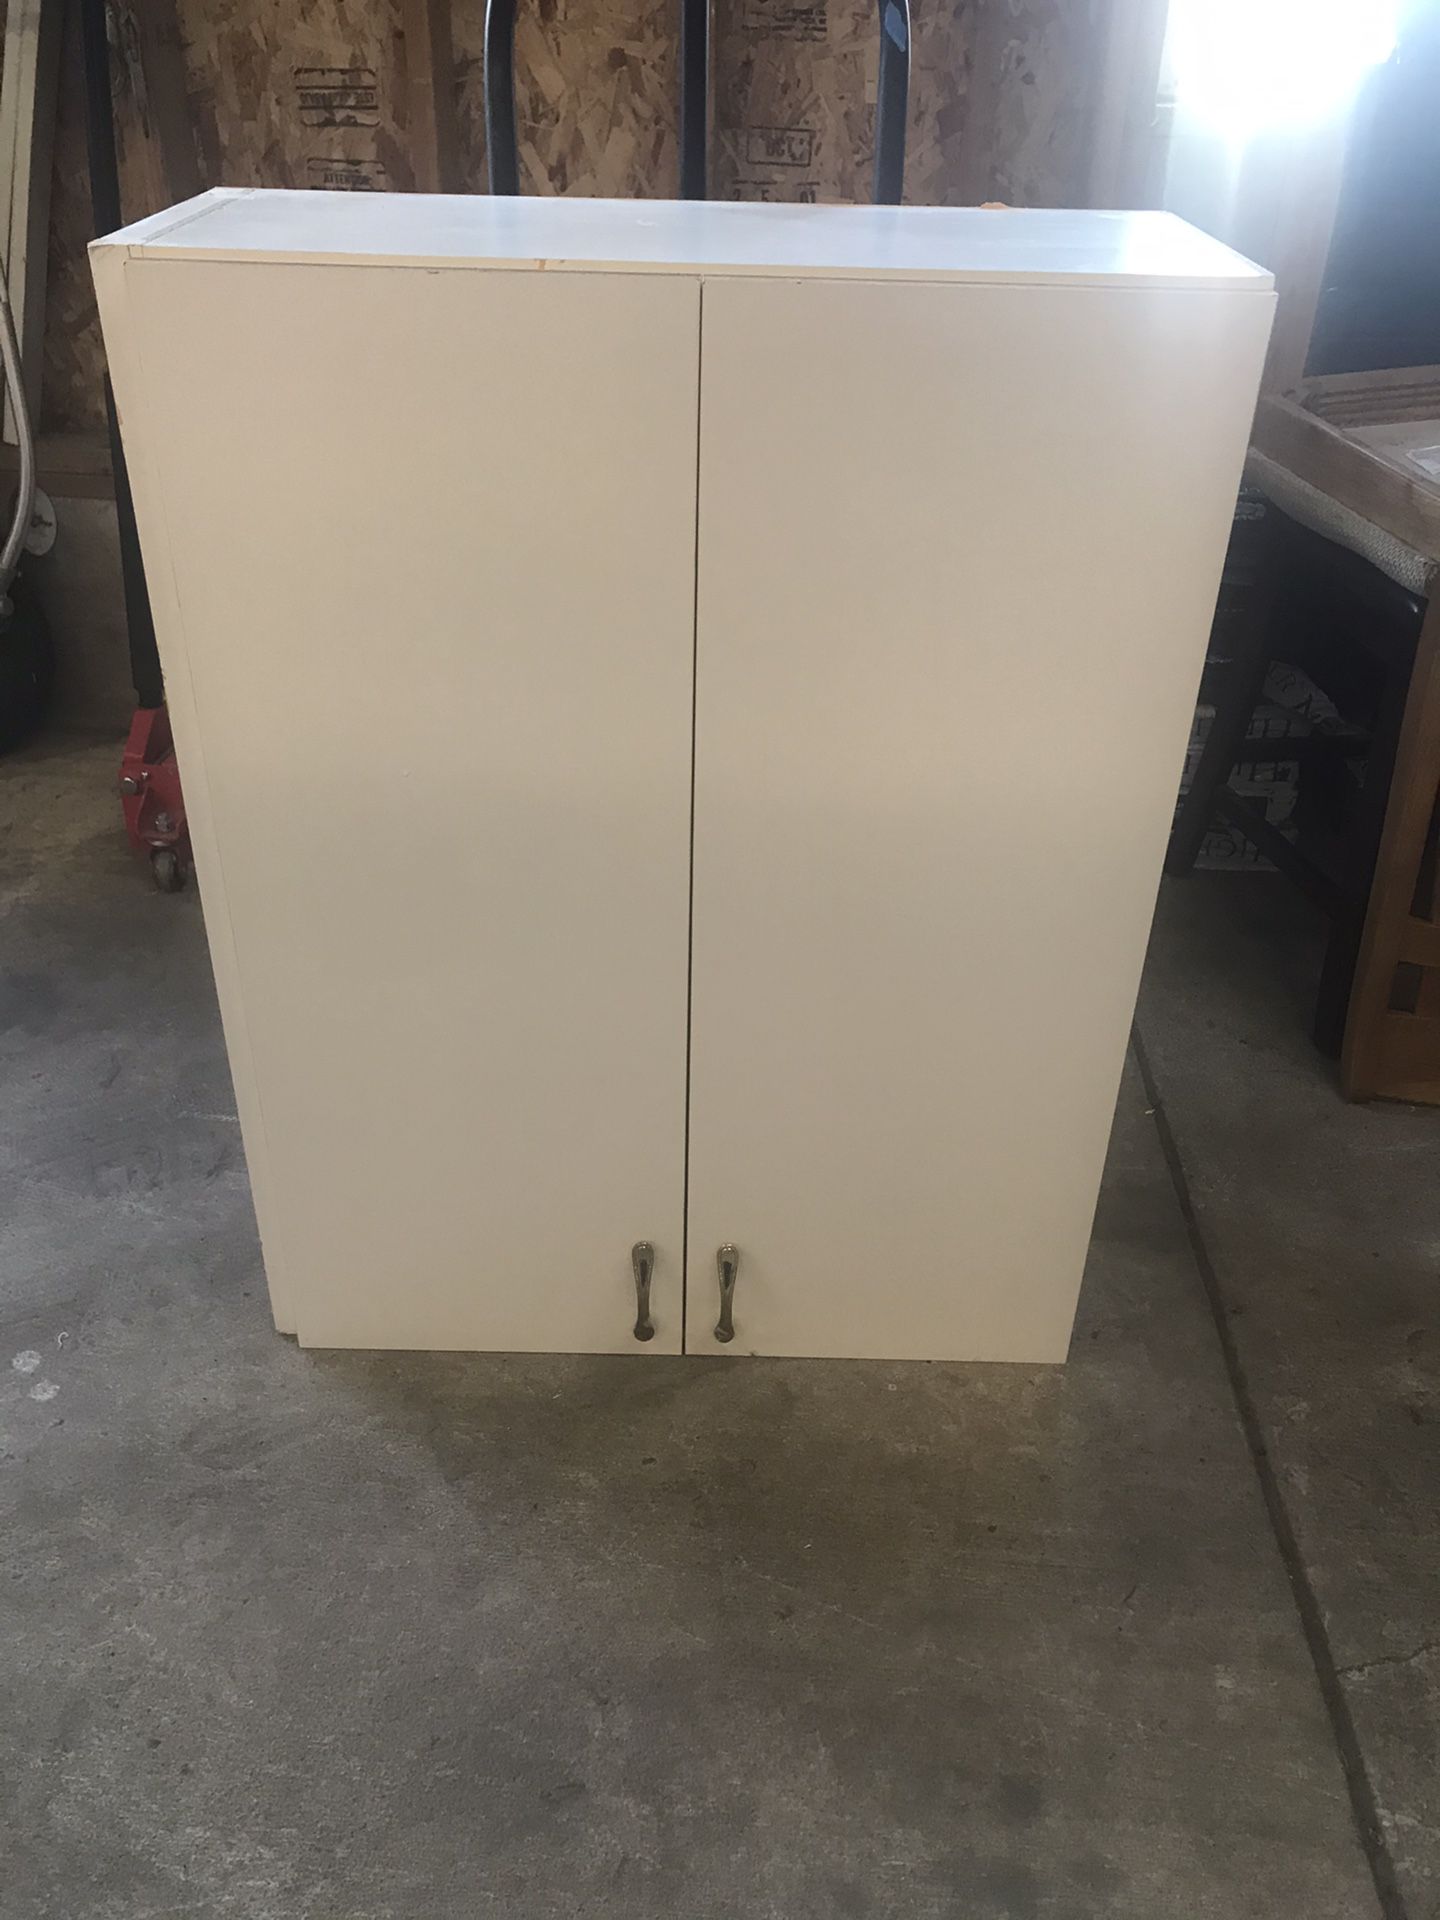 Used white cabinets for laundry, garage or kitchen